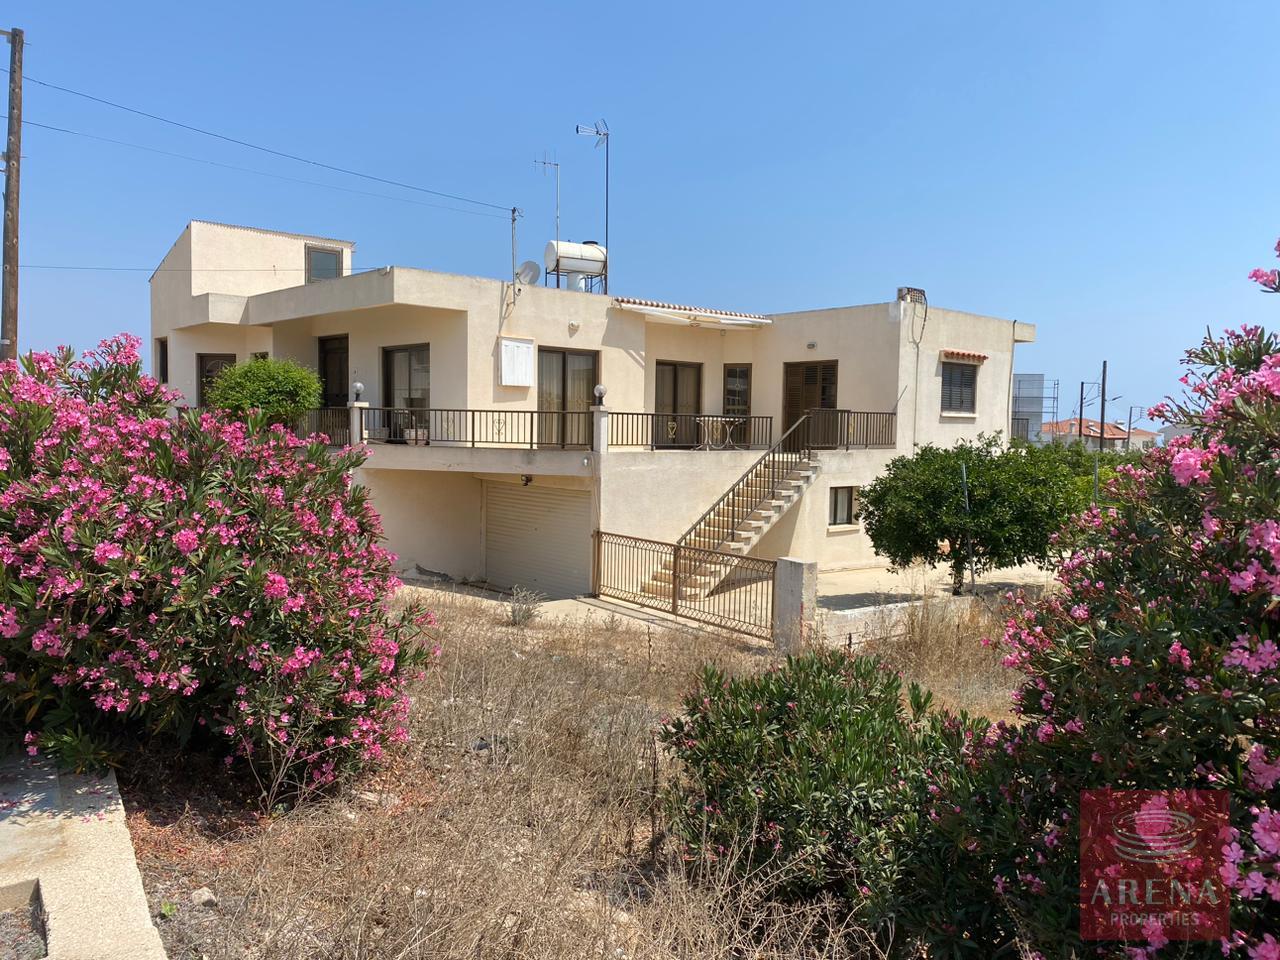 3 bed house in derynia for sale